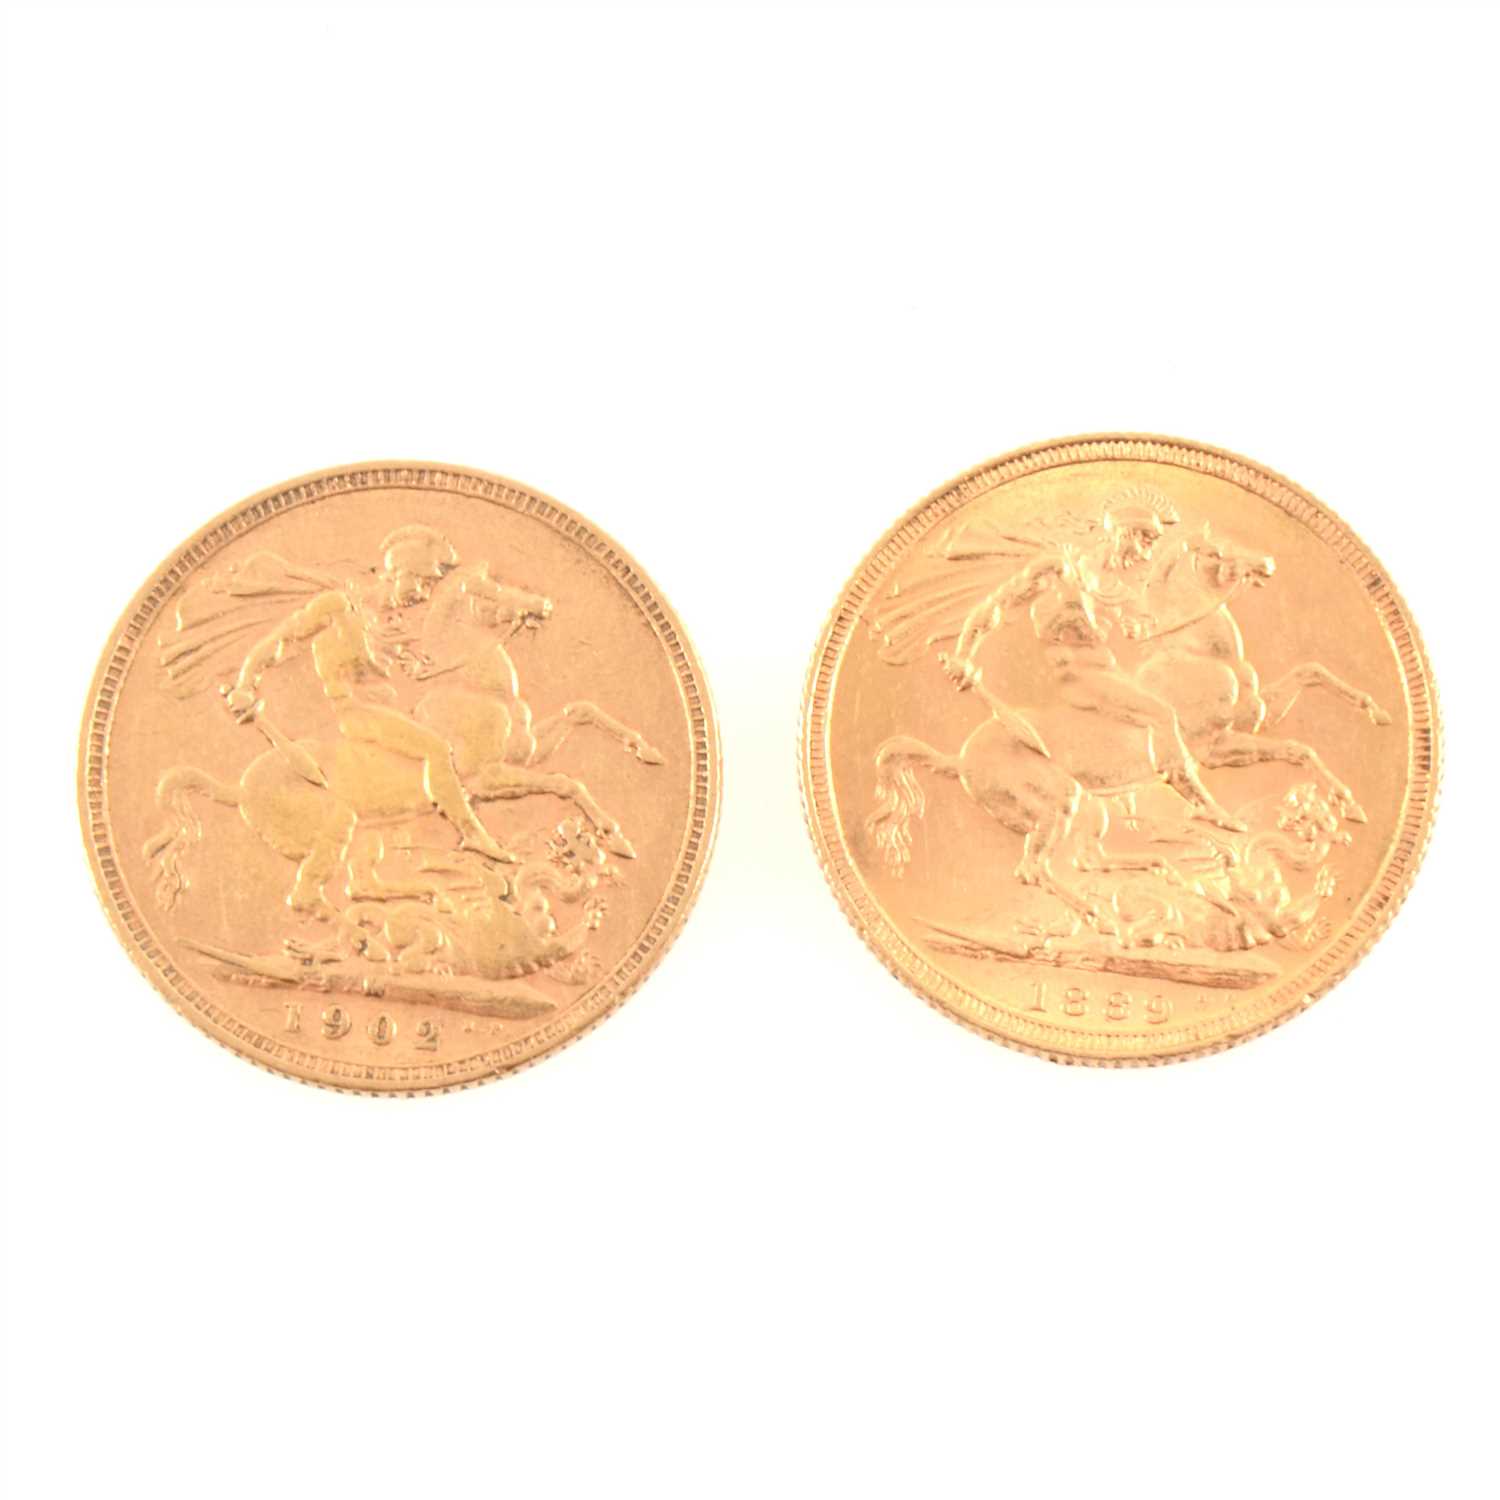 Lot 398 - Two Full Sovereigns, Victoria Jubilee Head 1889, Edward VII 1902 Melbourne Mint.